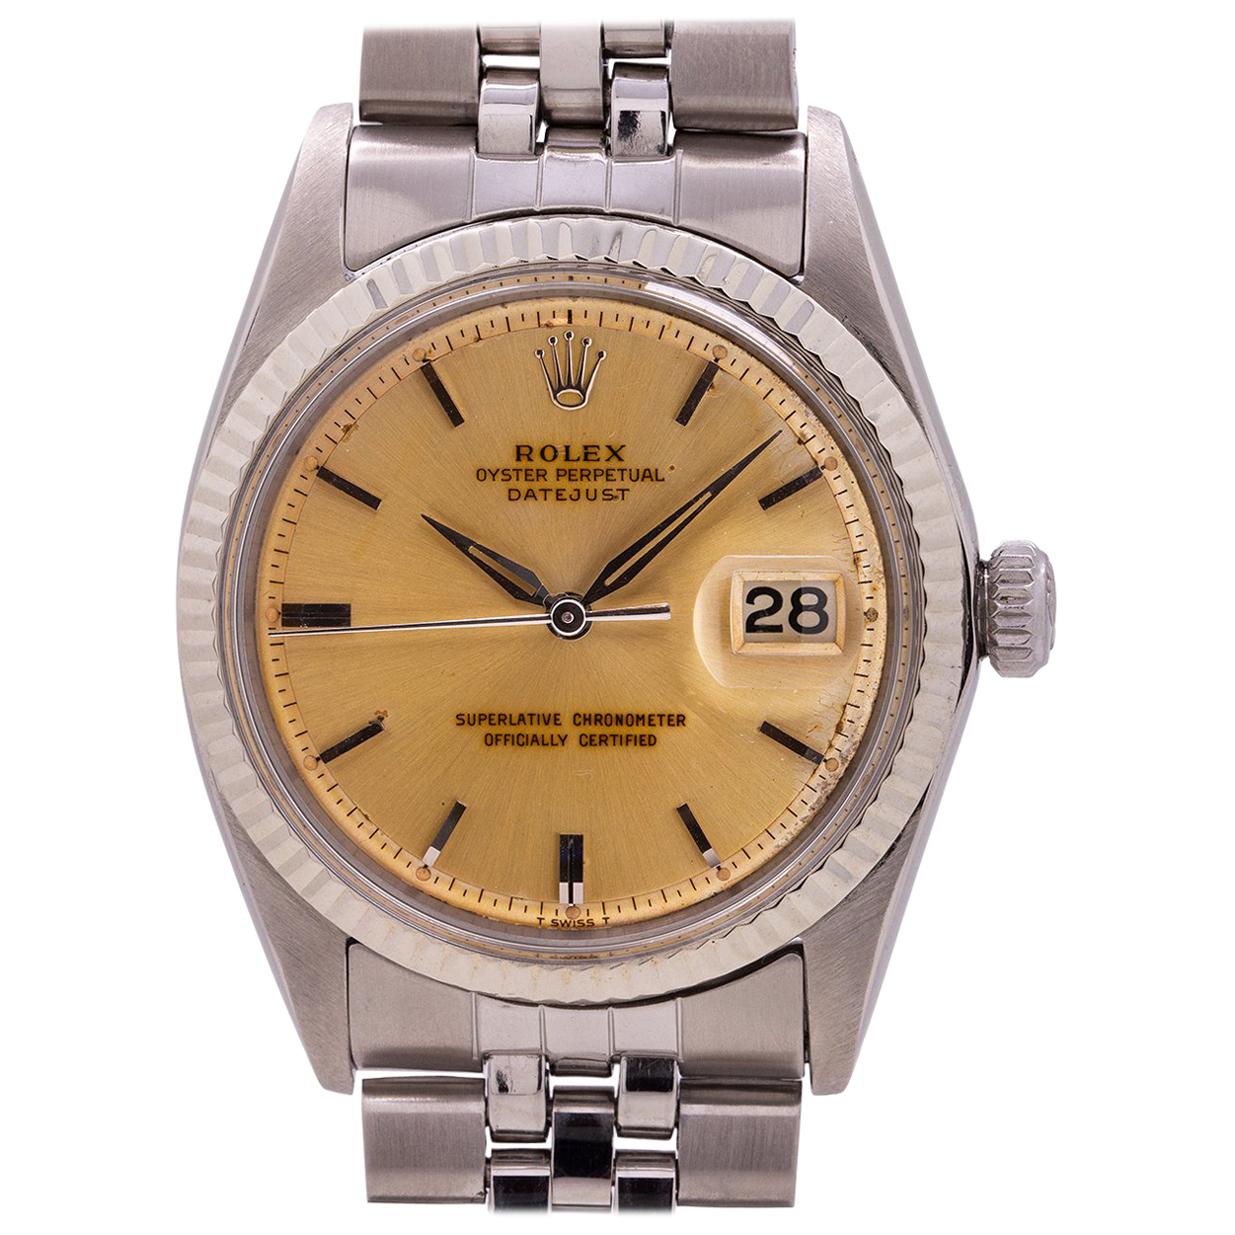 Rolex Datejust Ref 1601 Stainless Steel and 14 Karat Gold “Tropical”, circa 1965